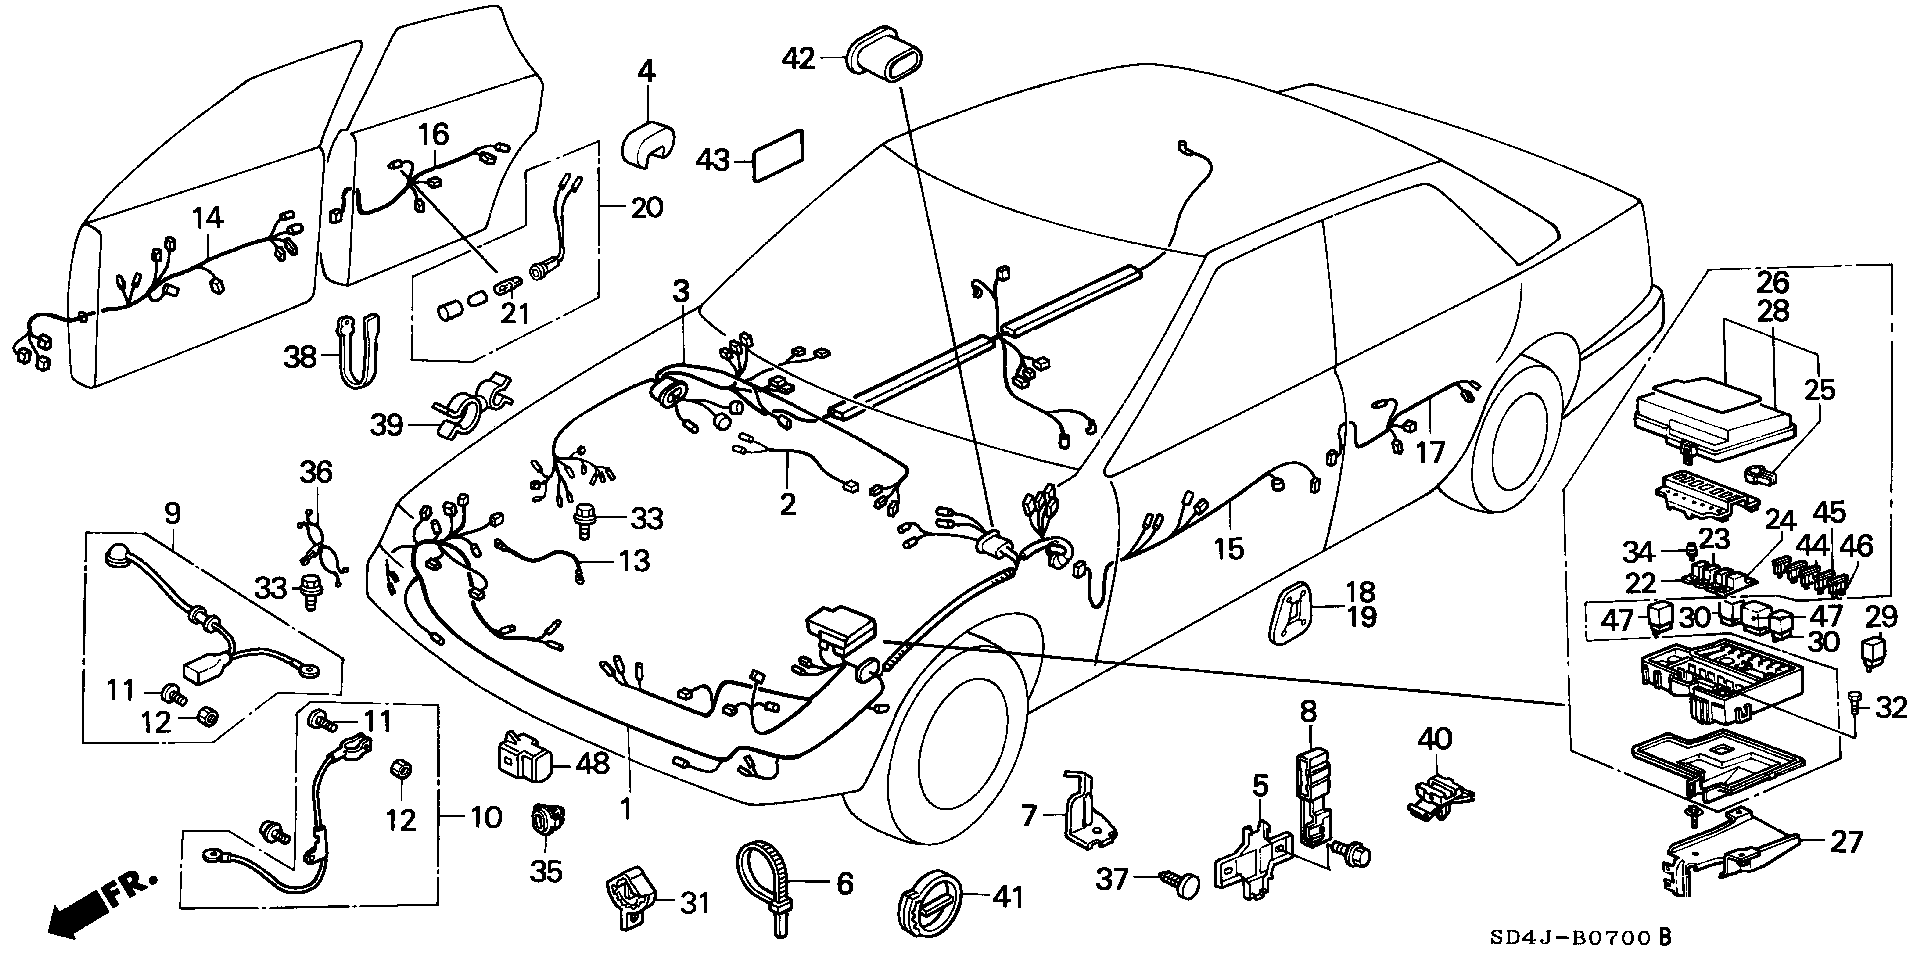 ENGINE ROOM/R. SIDE WIRE HARNESS